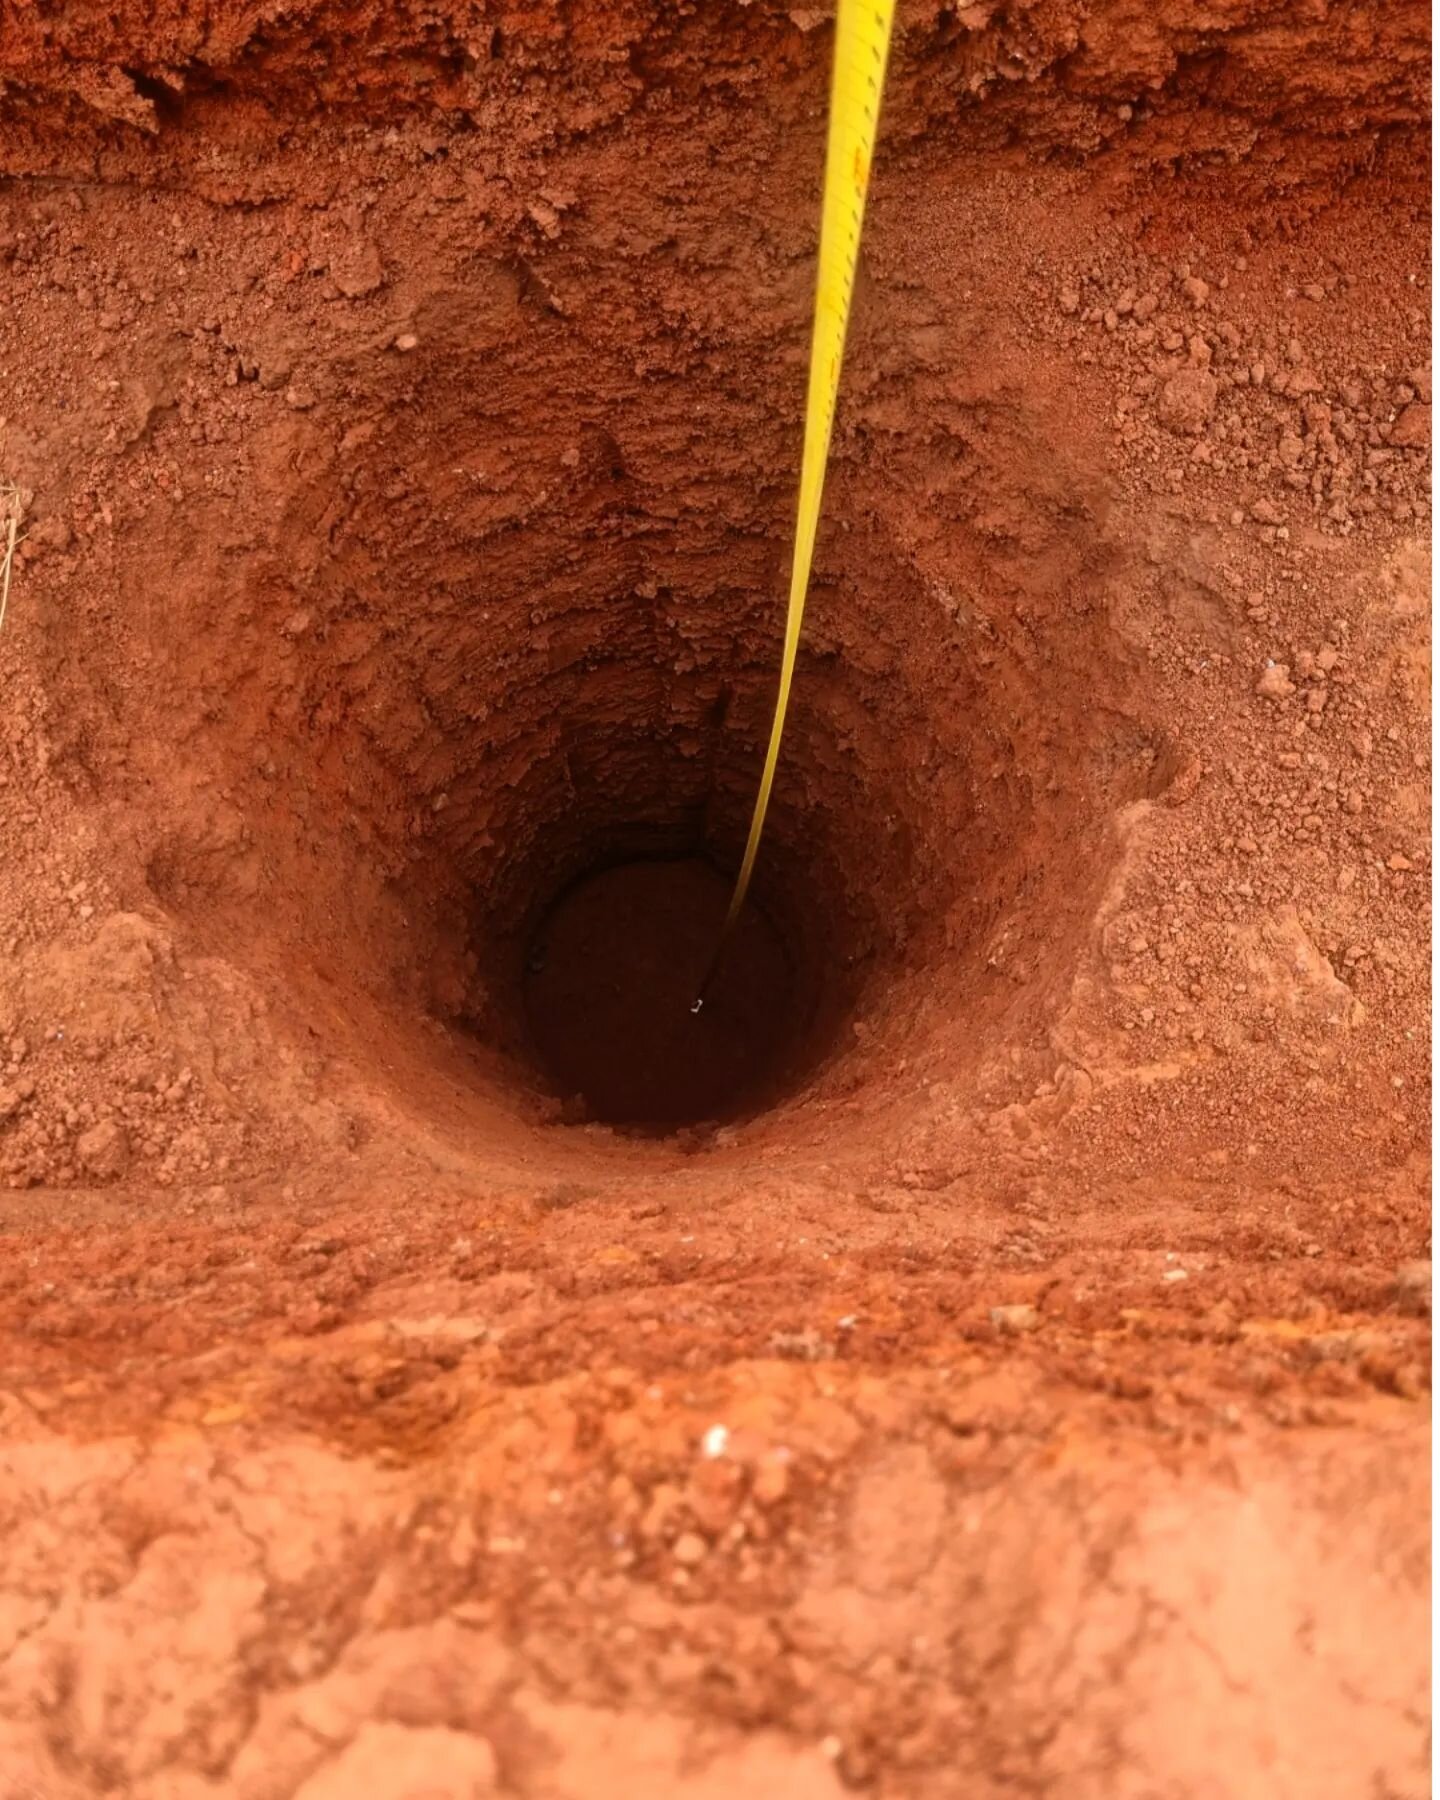 2.5m of red gold. That's as deep as we can dig, and it is beautiful rich red soil all the way down.

The part of the mountain on which we are situated is the remnants of an extinct volcanic complex which erupted in several phases between 11-13 millio